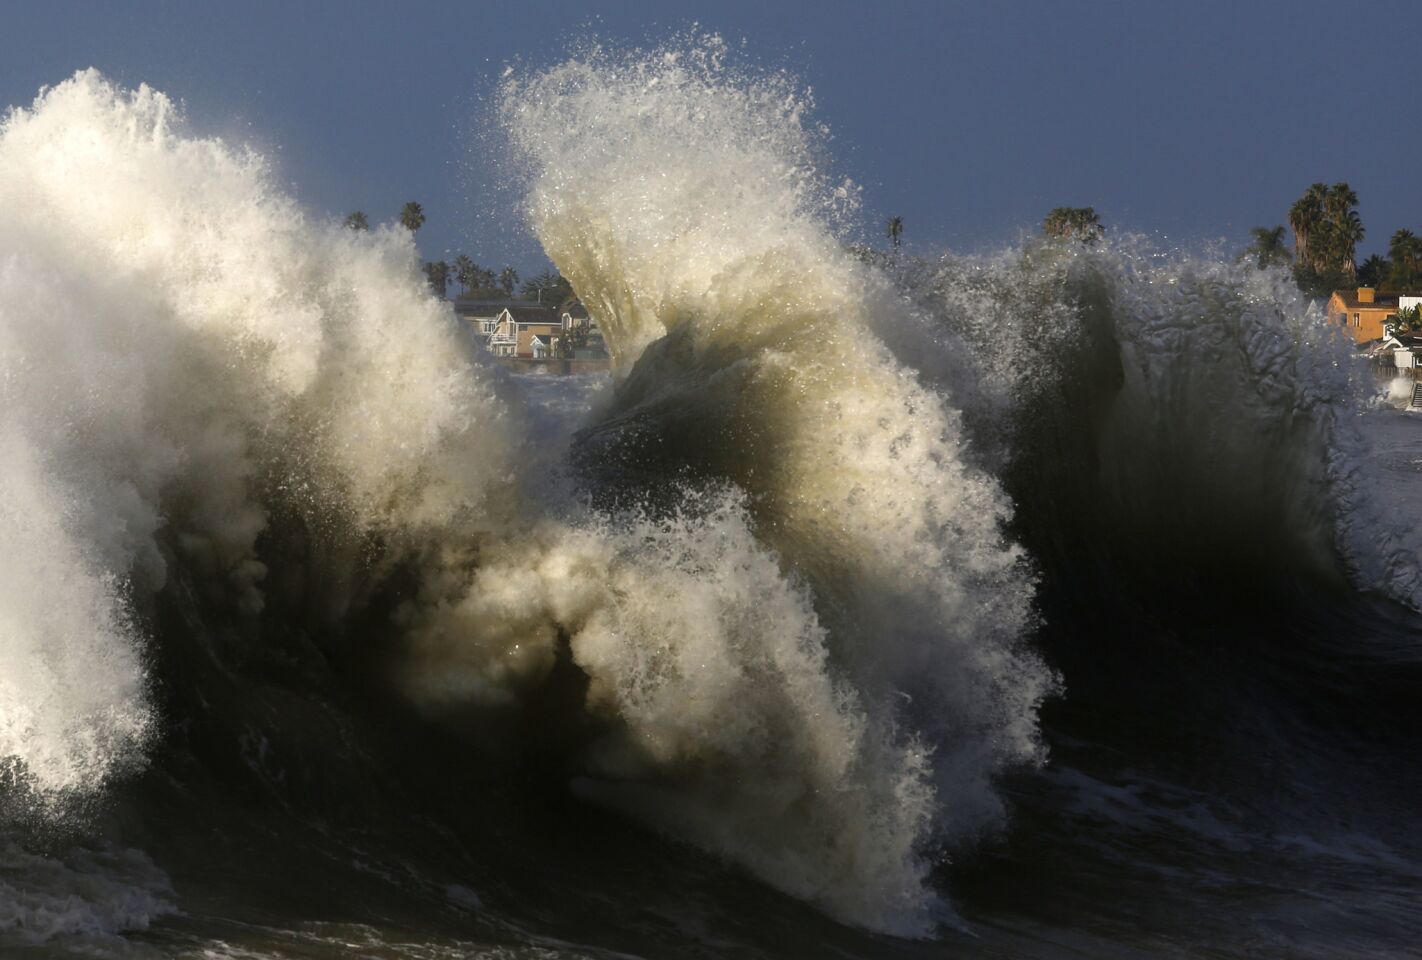 A big northwest swell combined with a high tide on Thursday morning along the southern California coast resulting in seaside communities being battered. Faria Beach in Ventura County was one of the areas especially hard hit.